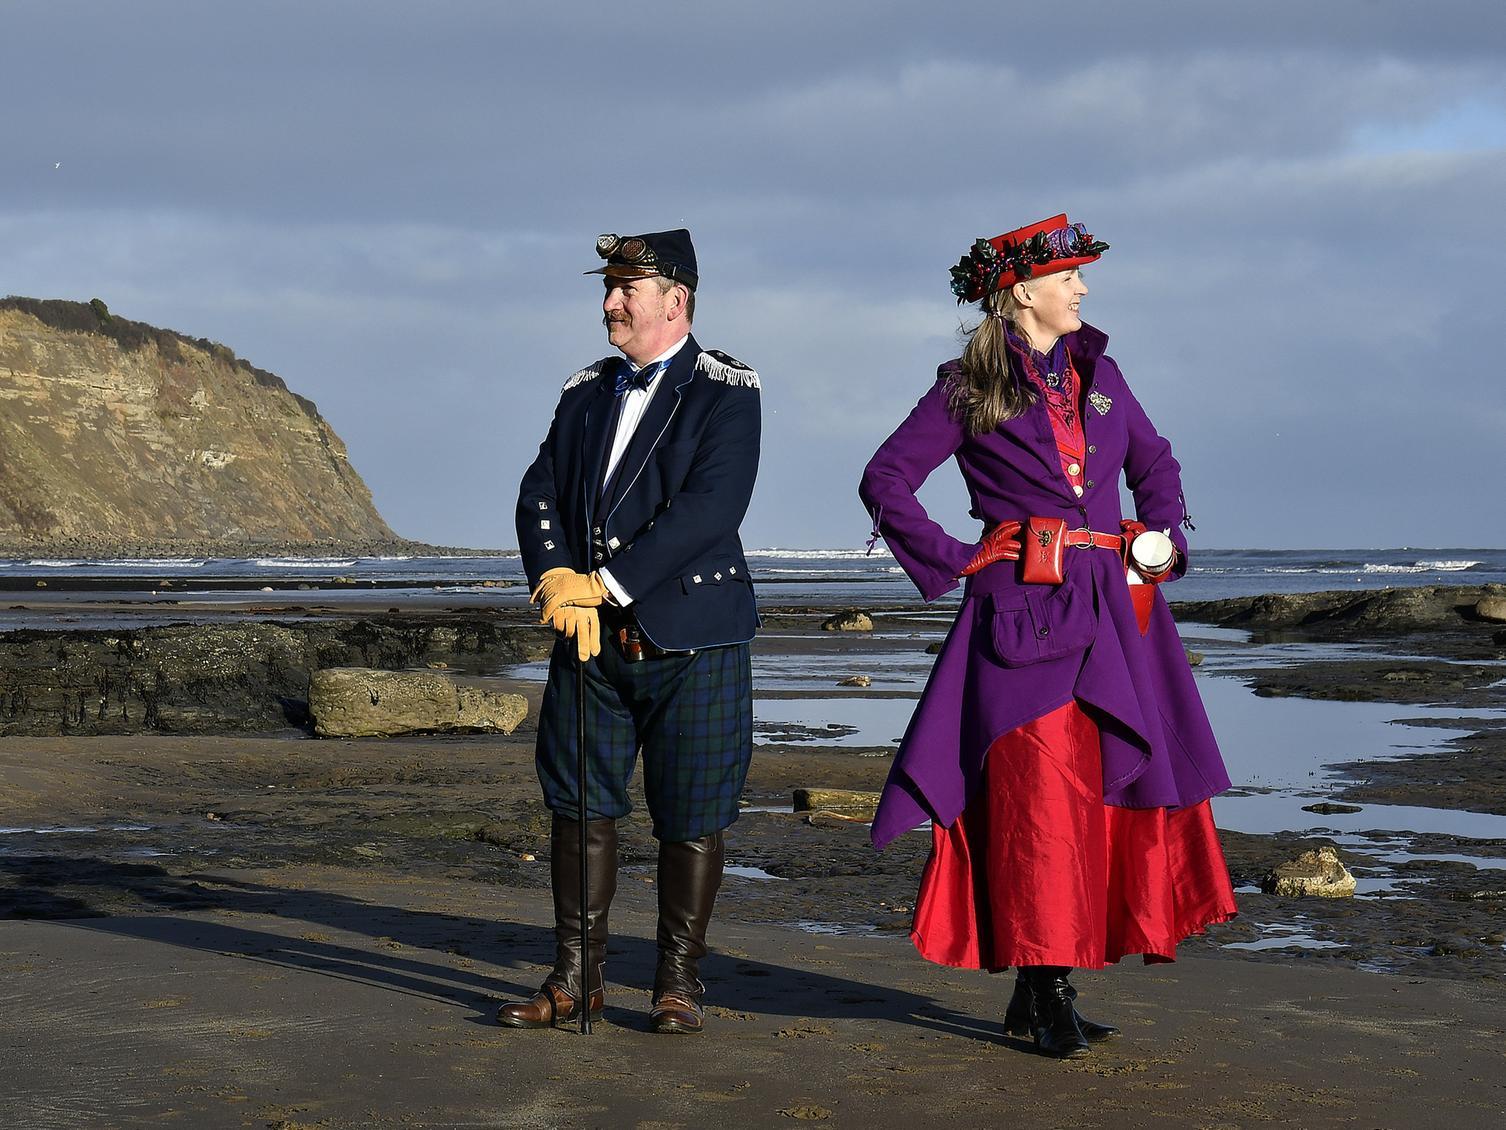 Take a step back in time this weekend at the annual Victorian Weekend in Robin Hood's Bay.